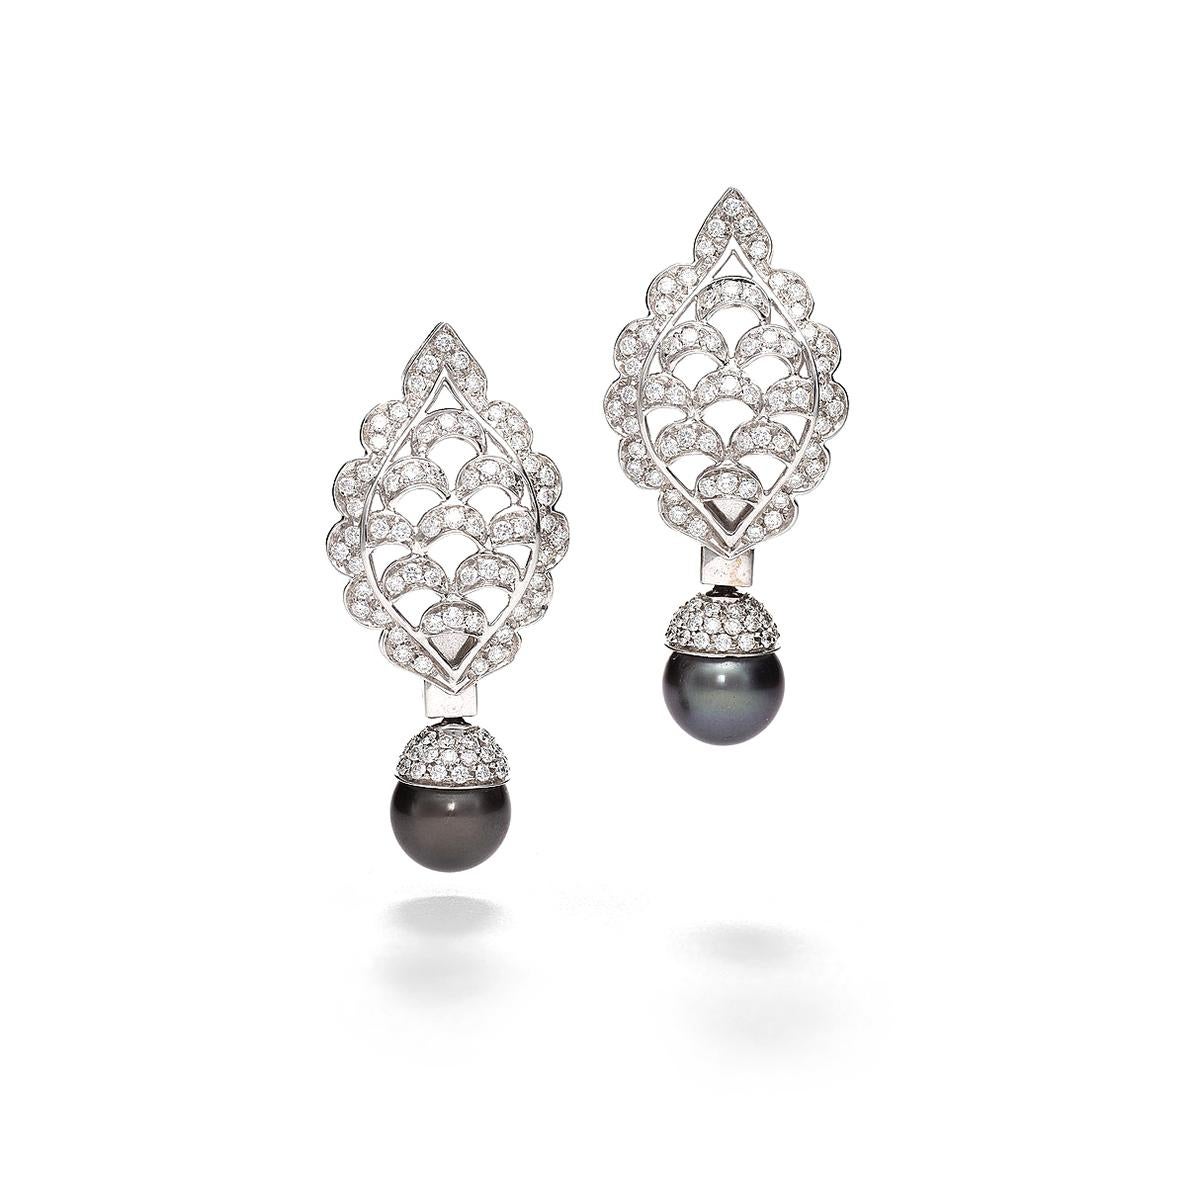 Earrings in 18kt white gold set with 2 black pearls 14.34 cts and 174 diamonds 2.43 cts